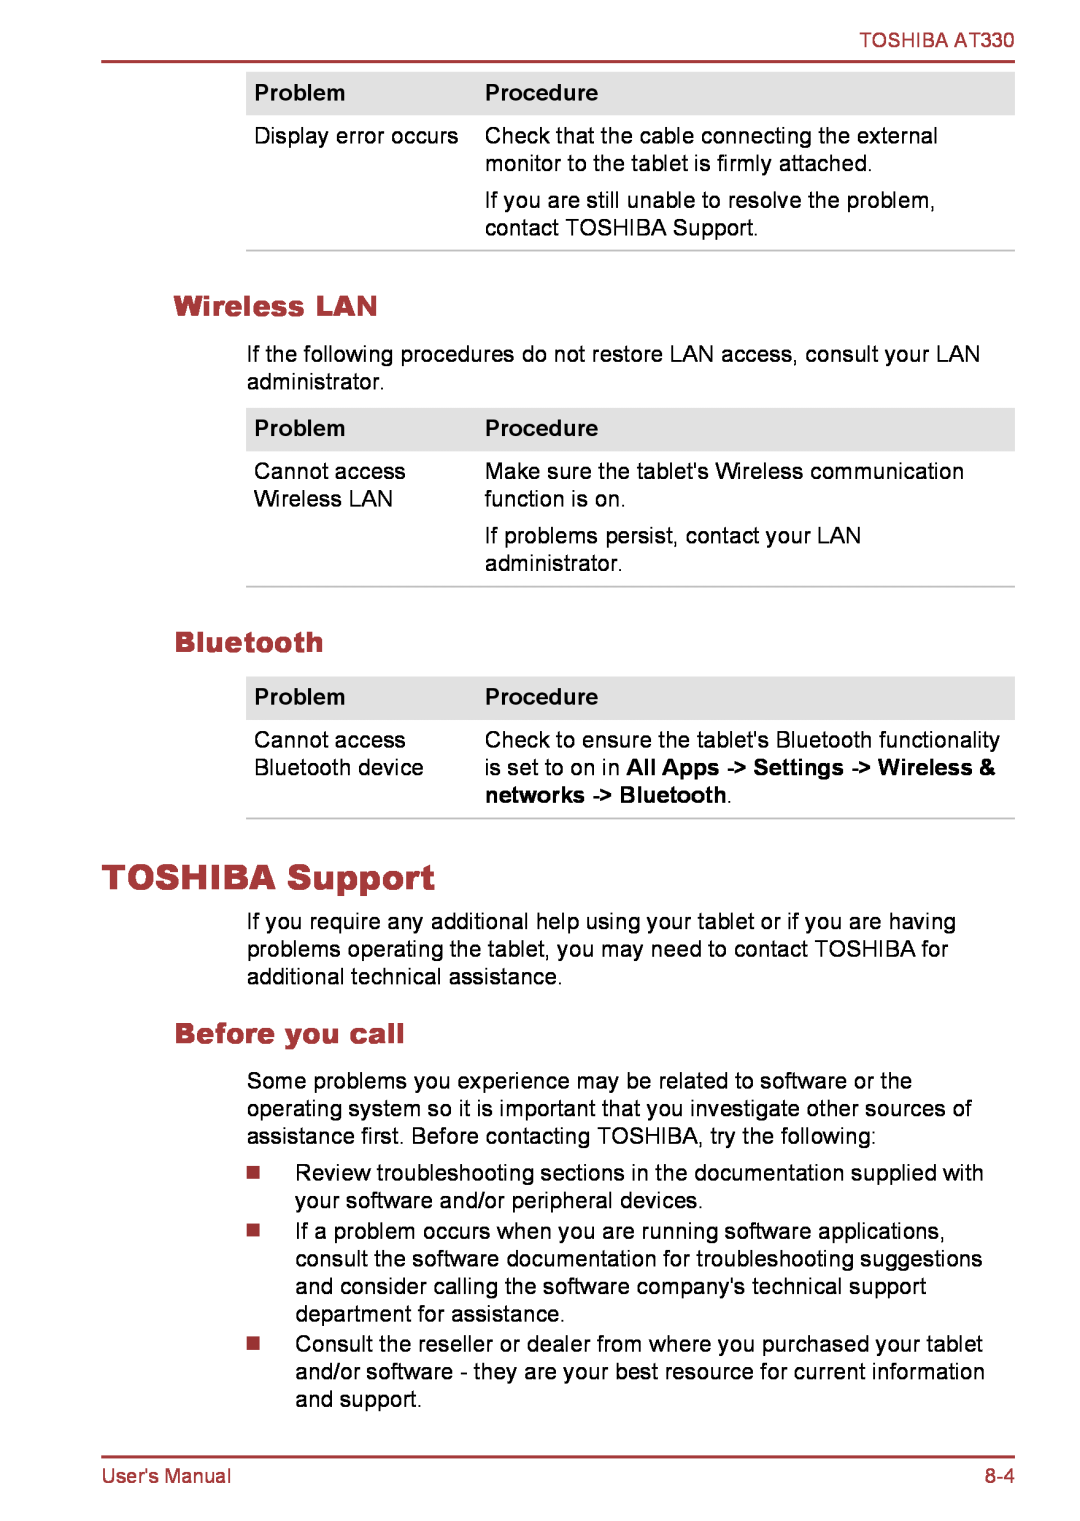 Toshiba at330 TOSHIBA Support, Wireless LAN, Before you call, Cannot access, Bluetooth device, networks - Bluetooth 